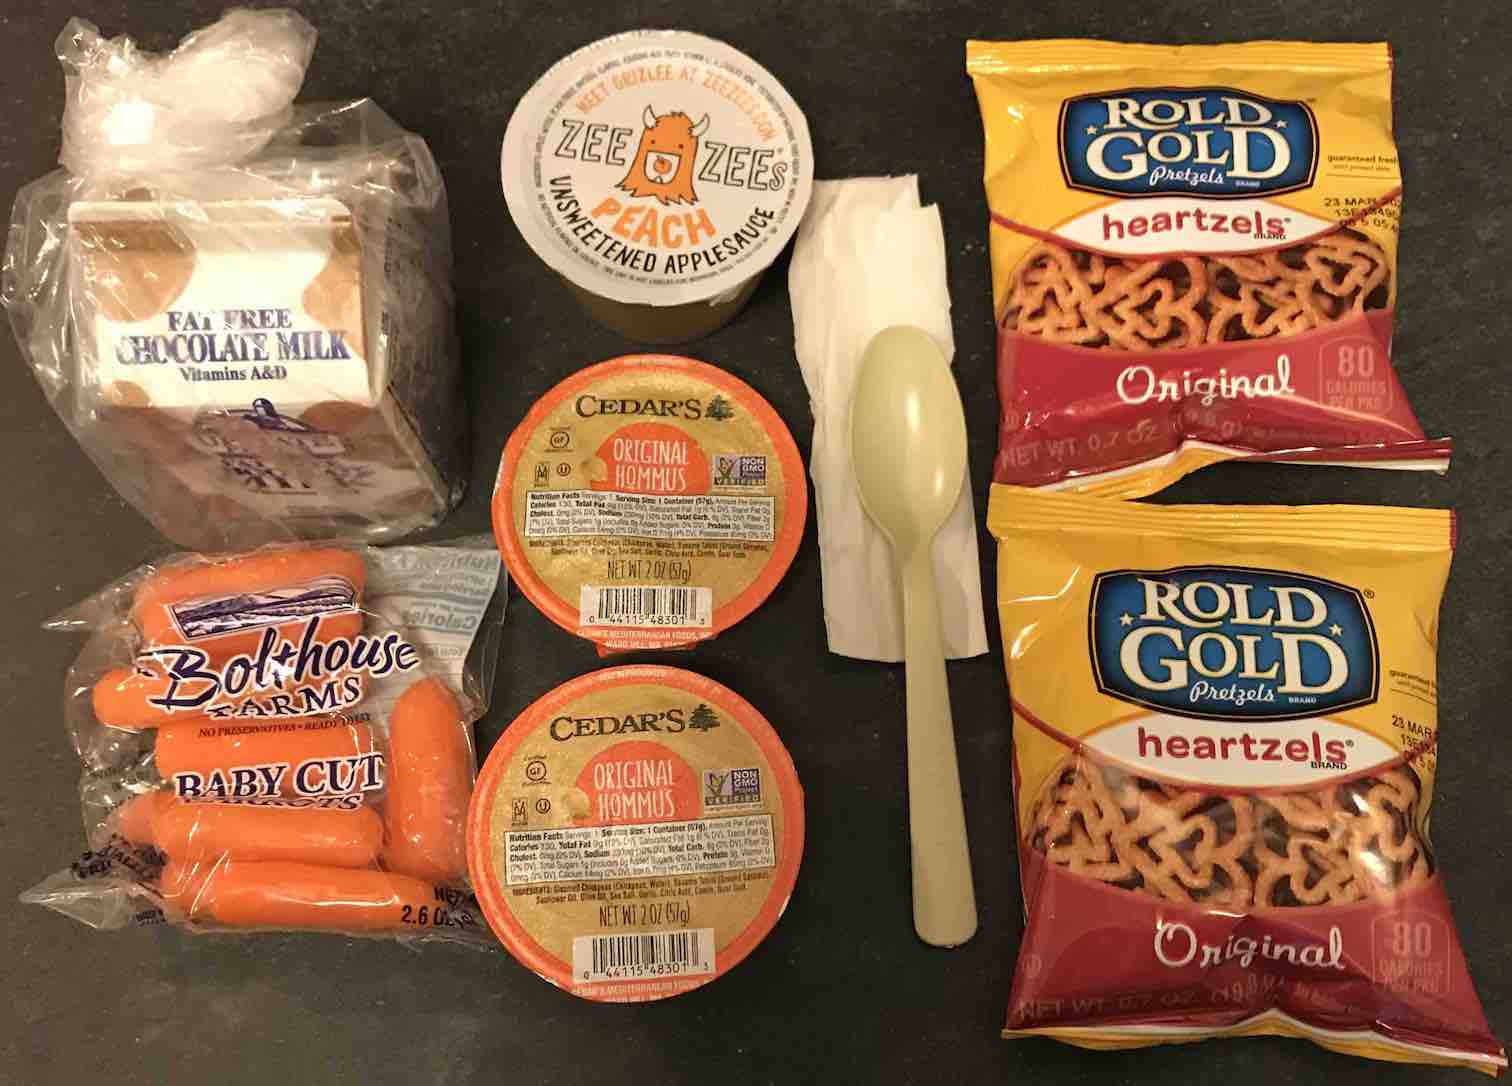 meal containing hummus, baby carrots, 2 pouches of pretzels, chocolate milk, apple and peach sauce, a paper napkin, and a plastic spoon